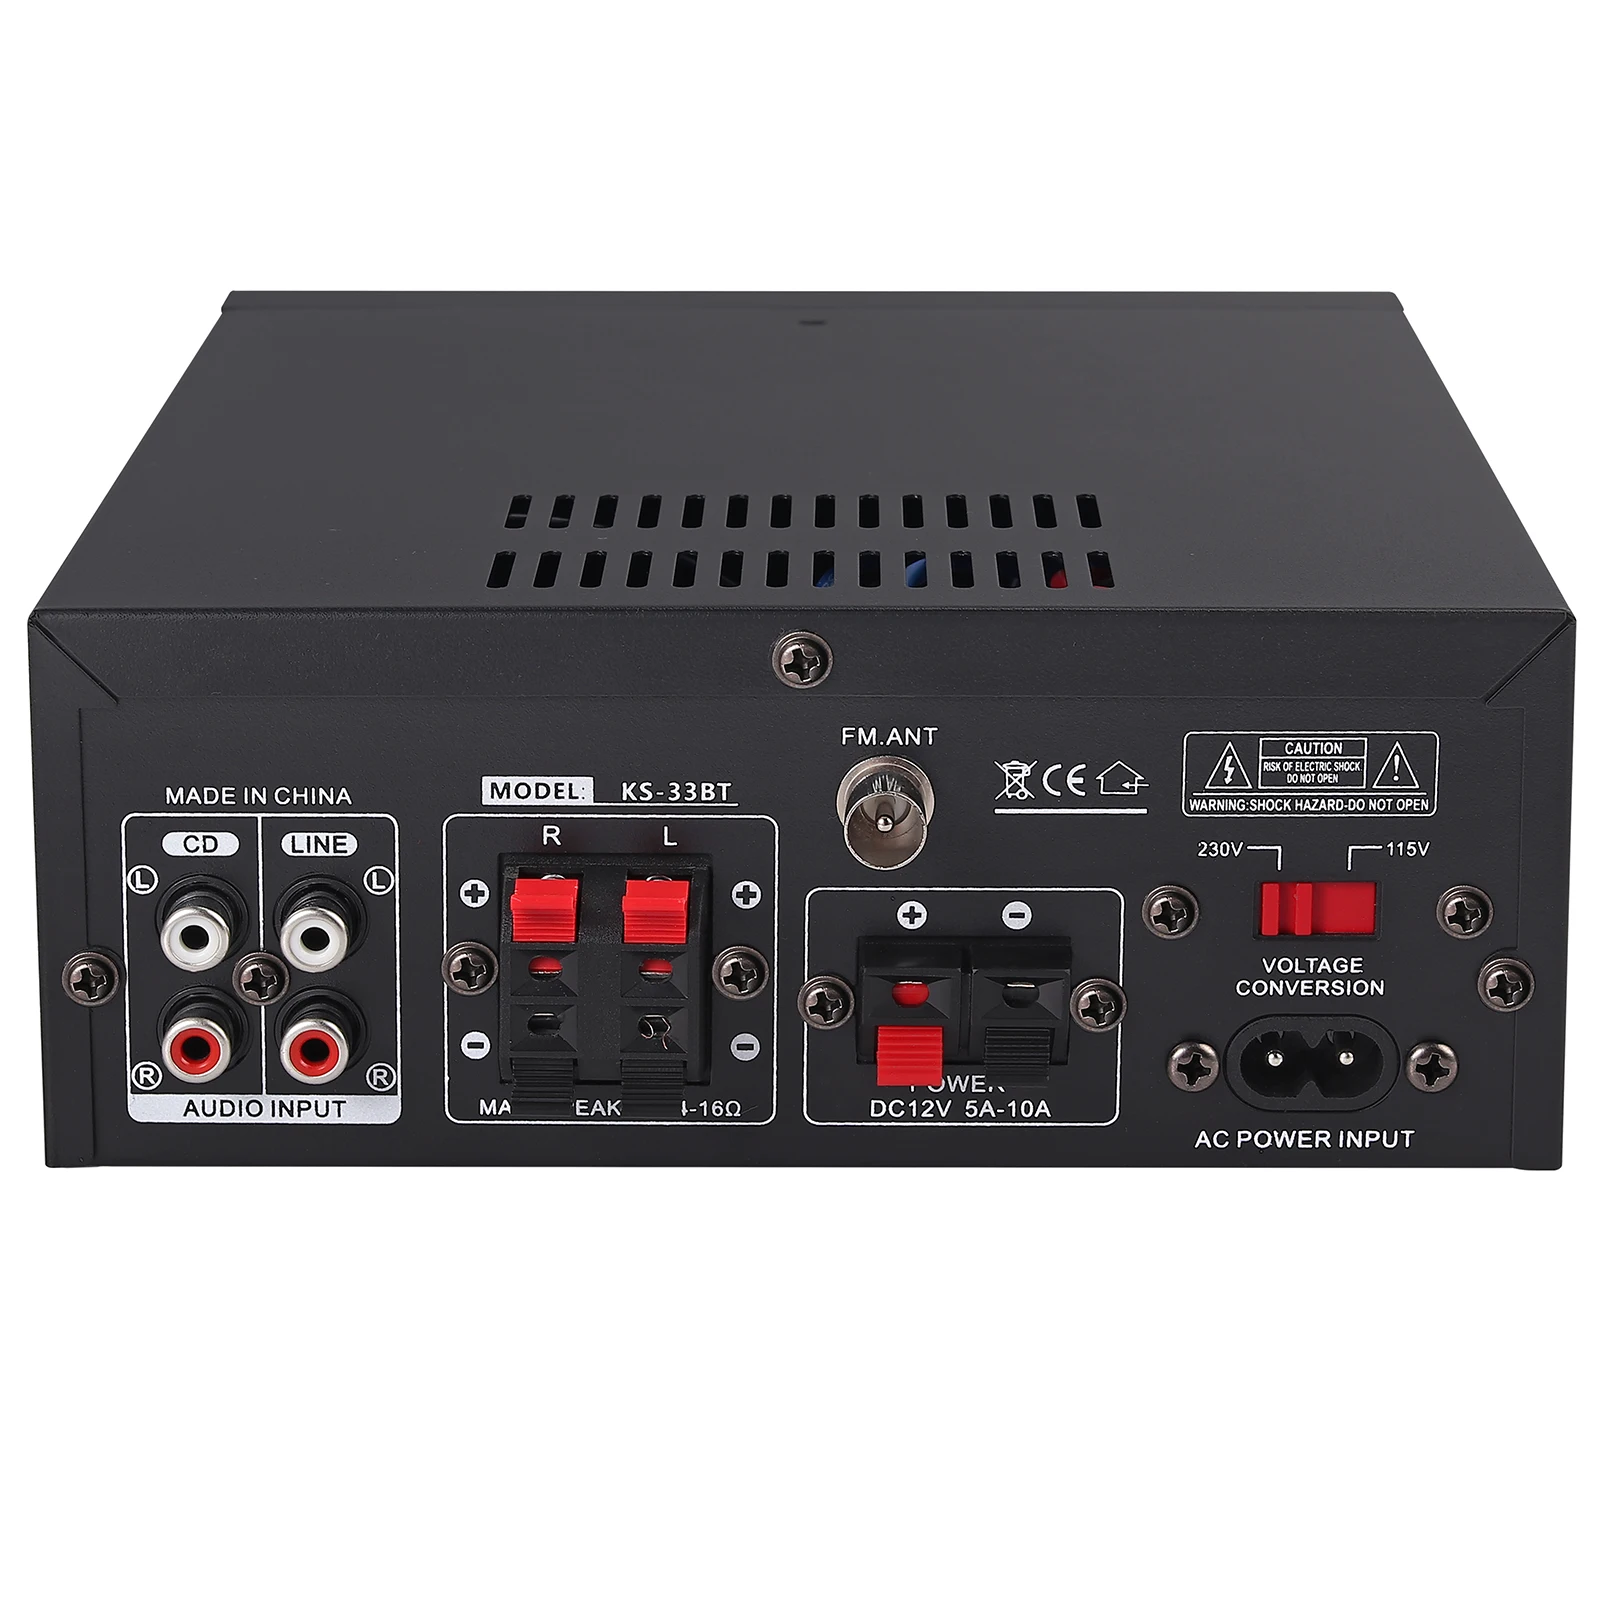 Bluetooth-Compatible Stereo Audio Amplifier KS-33BT Home HiFi Music SD USB FM MIC Wireless Digital Preamp With Microphone Input bluetooth amplifier